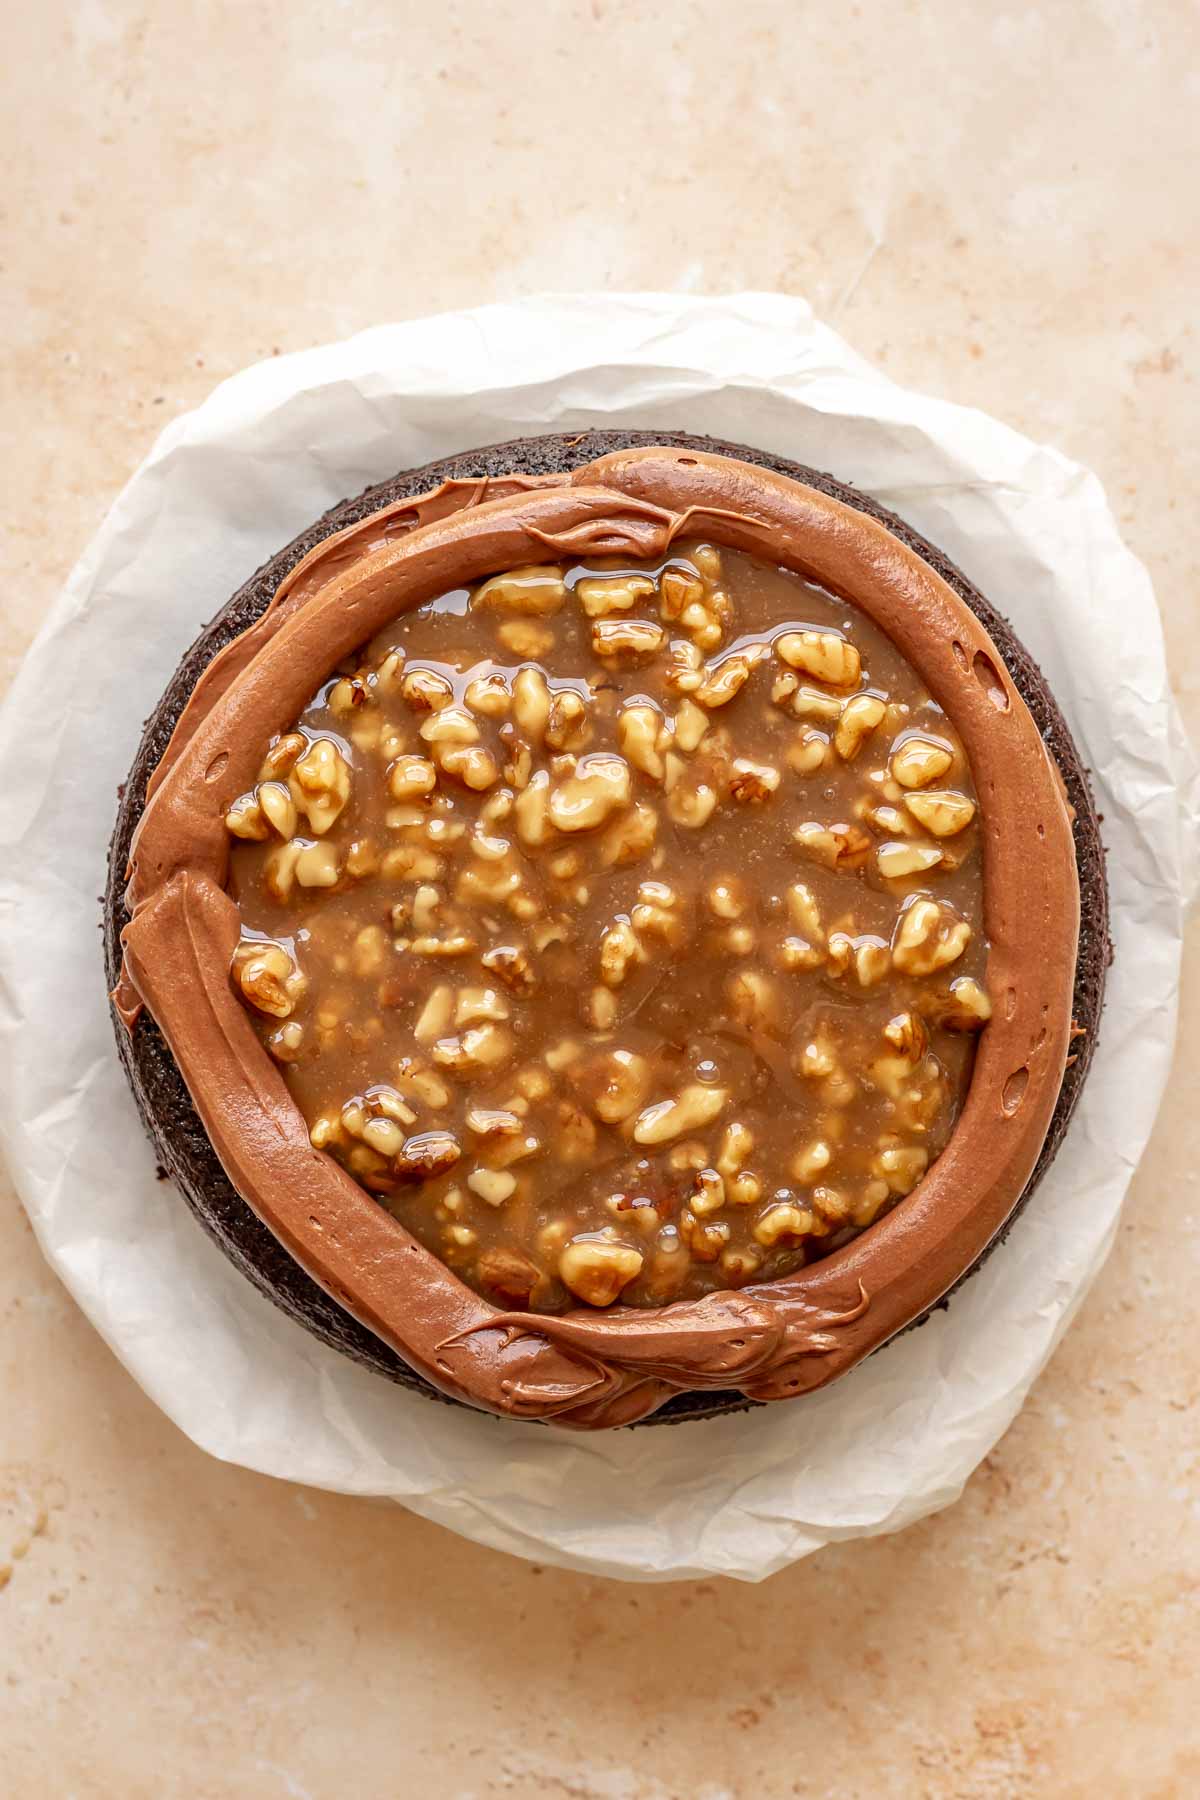 Caramel walnut filling is added to the cake.